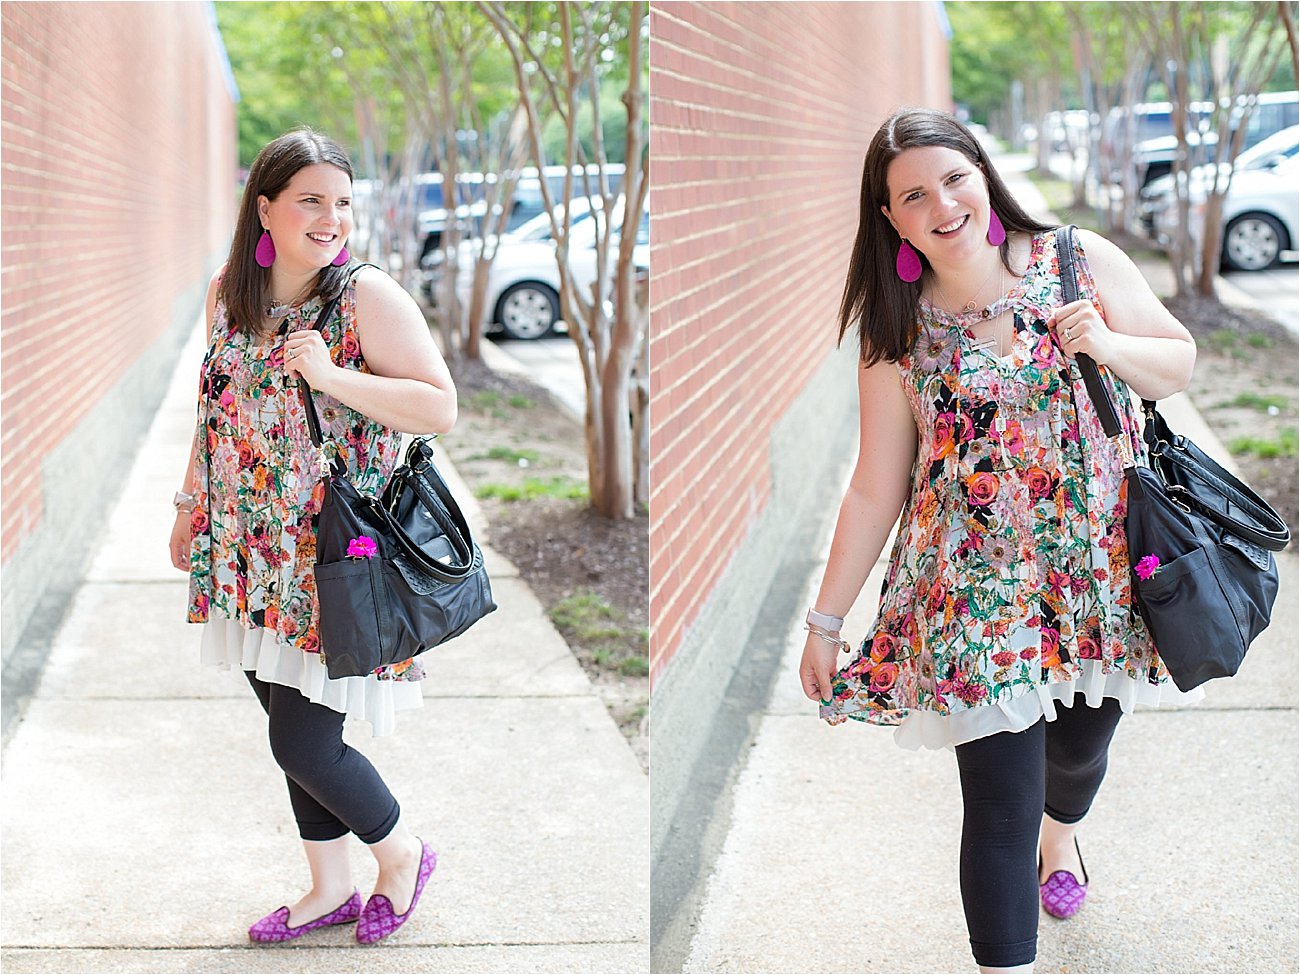 Grace & Lace floral tunic, chiffon lace extender, LulaRoe black leggings, Lily Jade diaper bag, Nickel and Suede earrings, The Root Collective "Millie" smoking shoes | North Carolina Fashion Blogger (6)